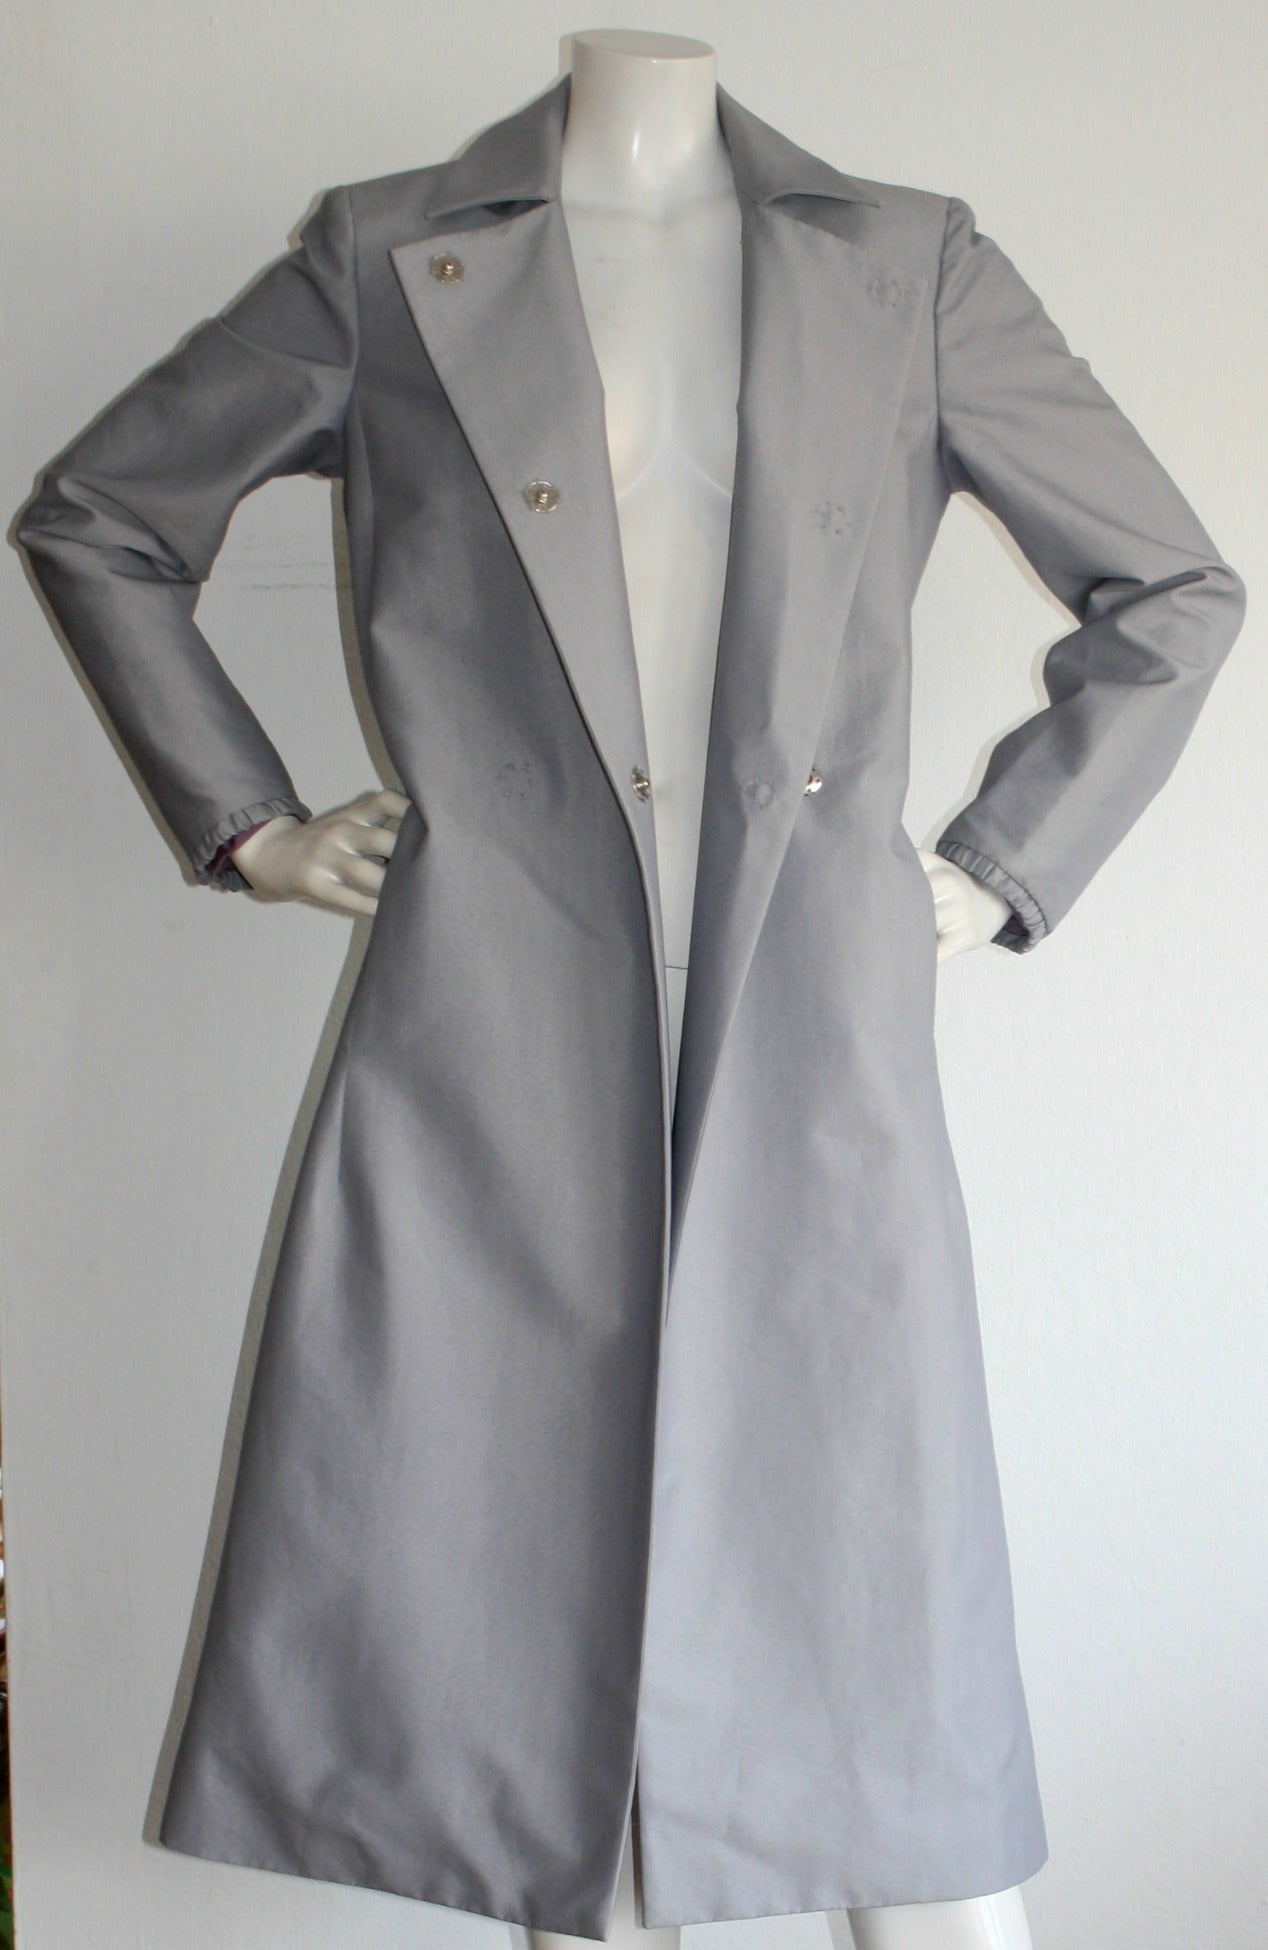 Beautiful periwinkle blue MARC JACOBS early 2000s y2k cotton blend Spy Trench Coat. Great detailing at the cuffs. Double Breasted style, that feature oversized interior snaps. Looks great open or closed! Fully lined. In great condition. 
Marked Size